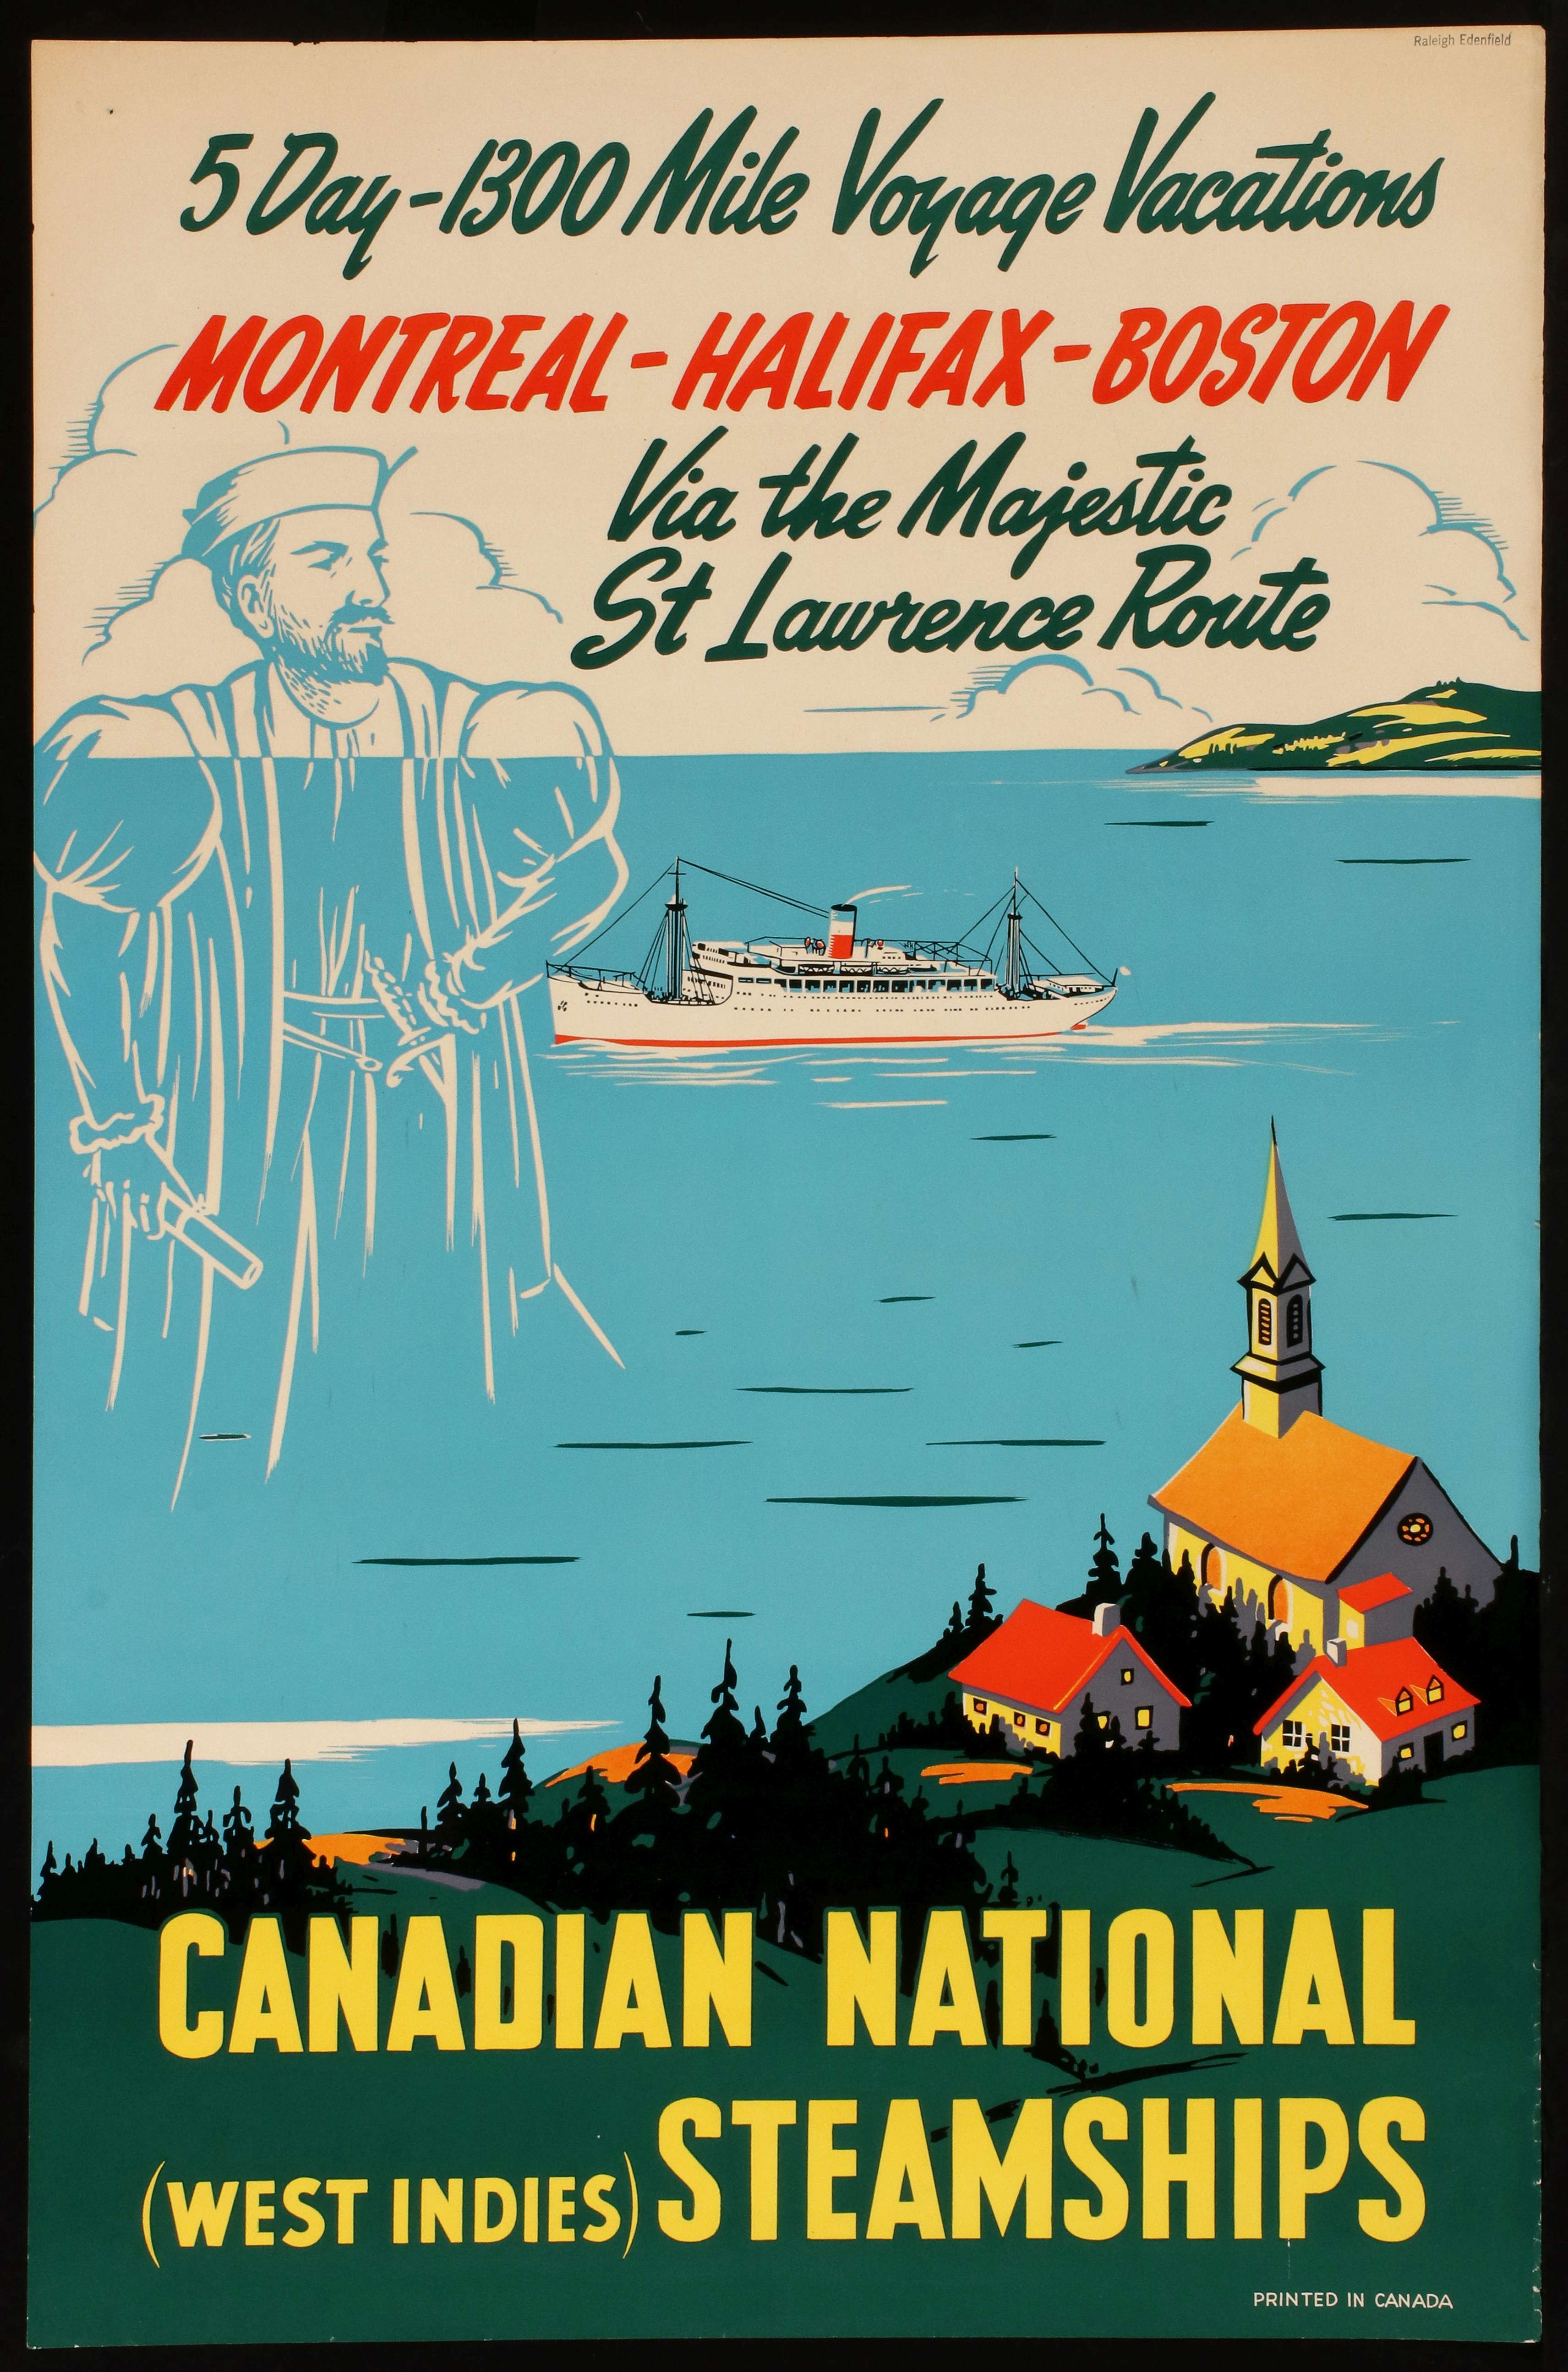 A CANADIAN NATIONAL STEAMSHIPS TRAVEL POSTER